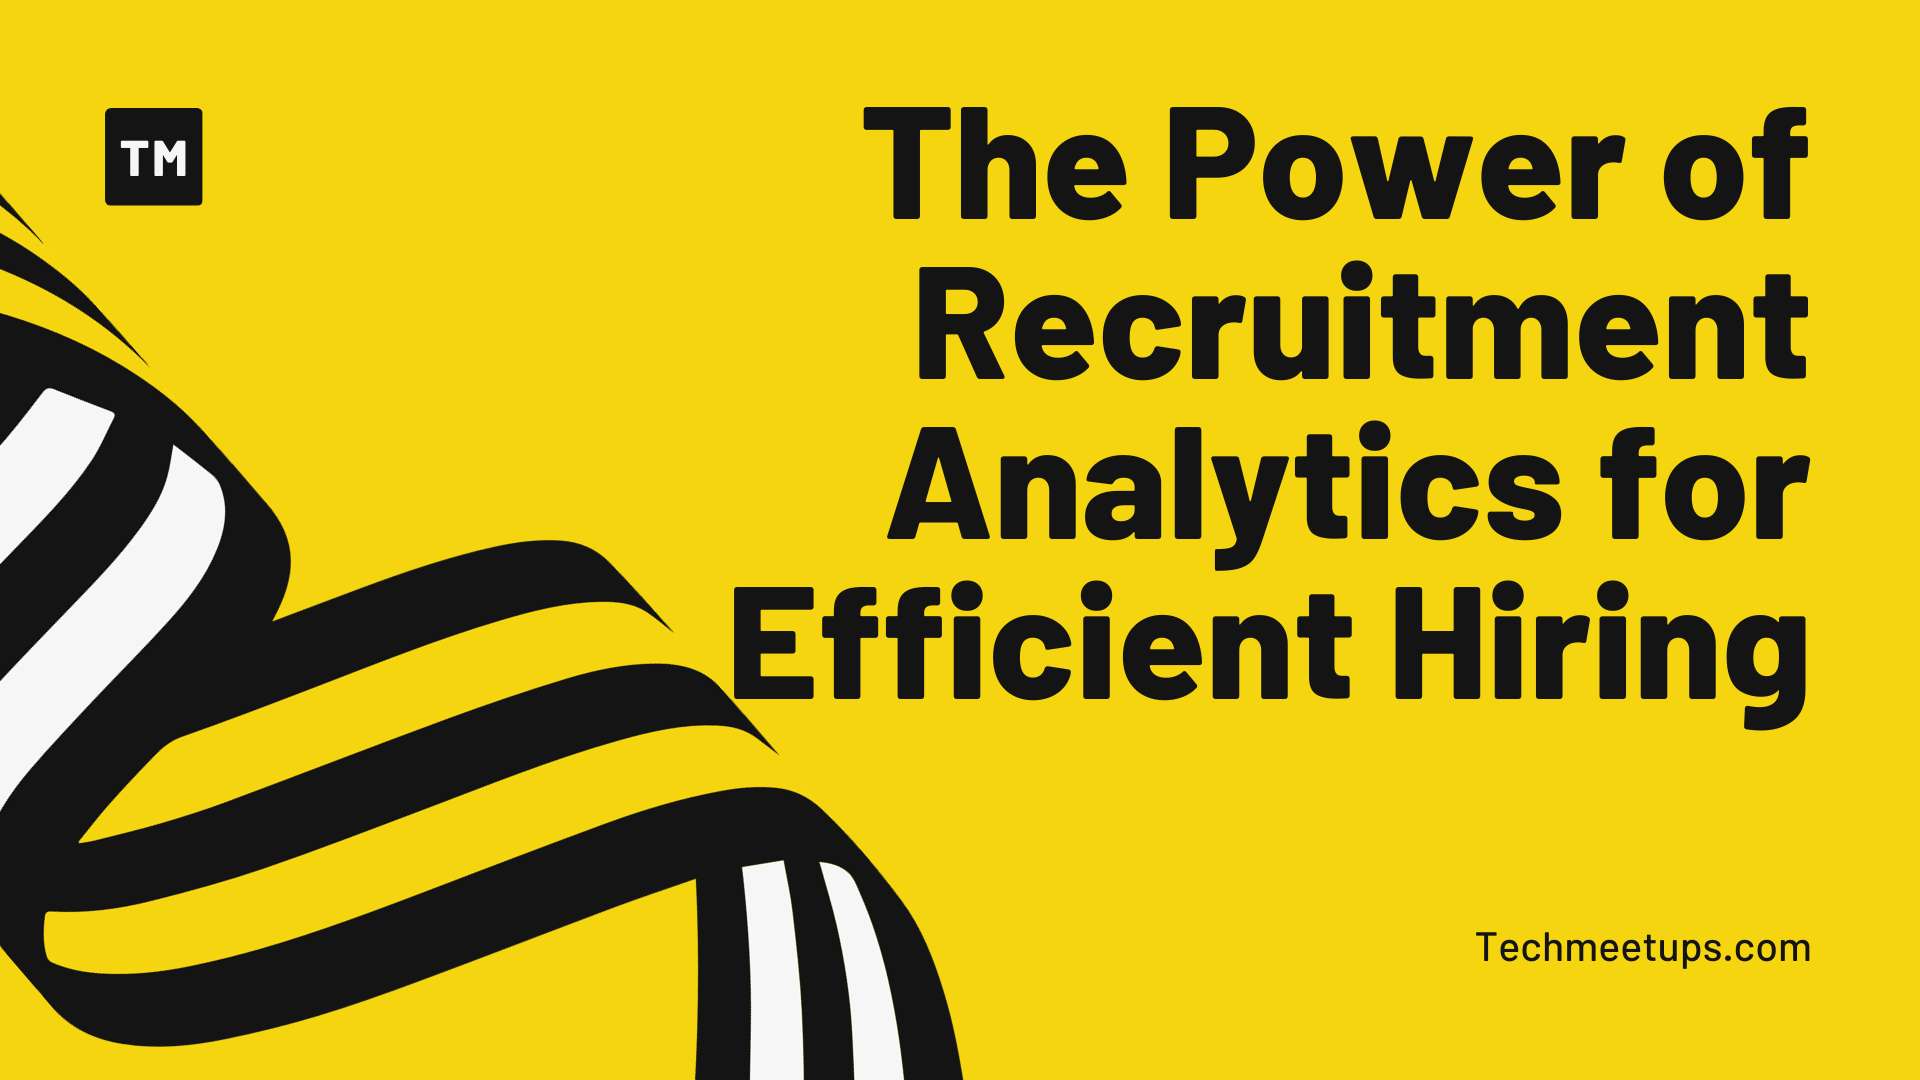 The Power of Recruitment Analytics for Efficient Hiring